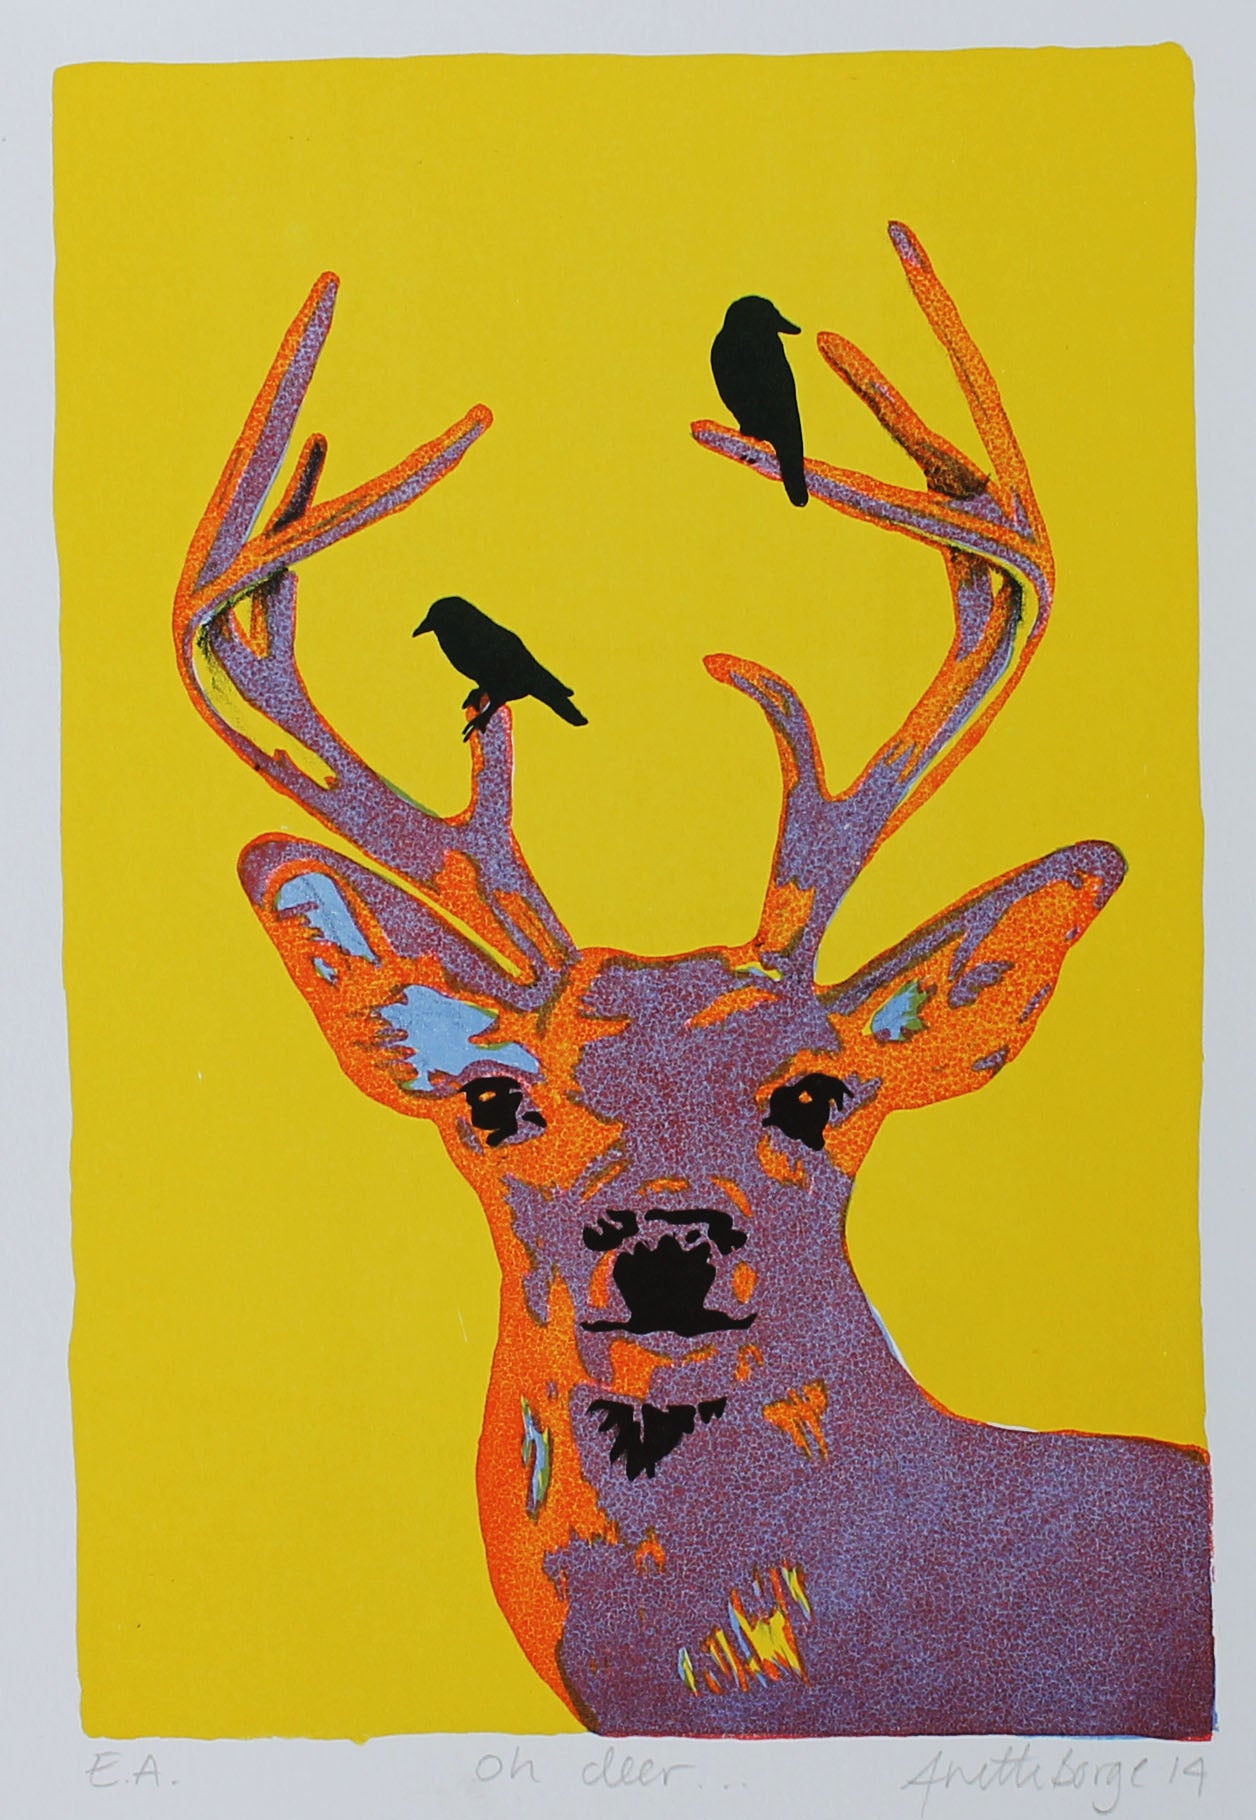 Anette Borge "Oh deer"